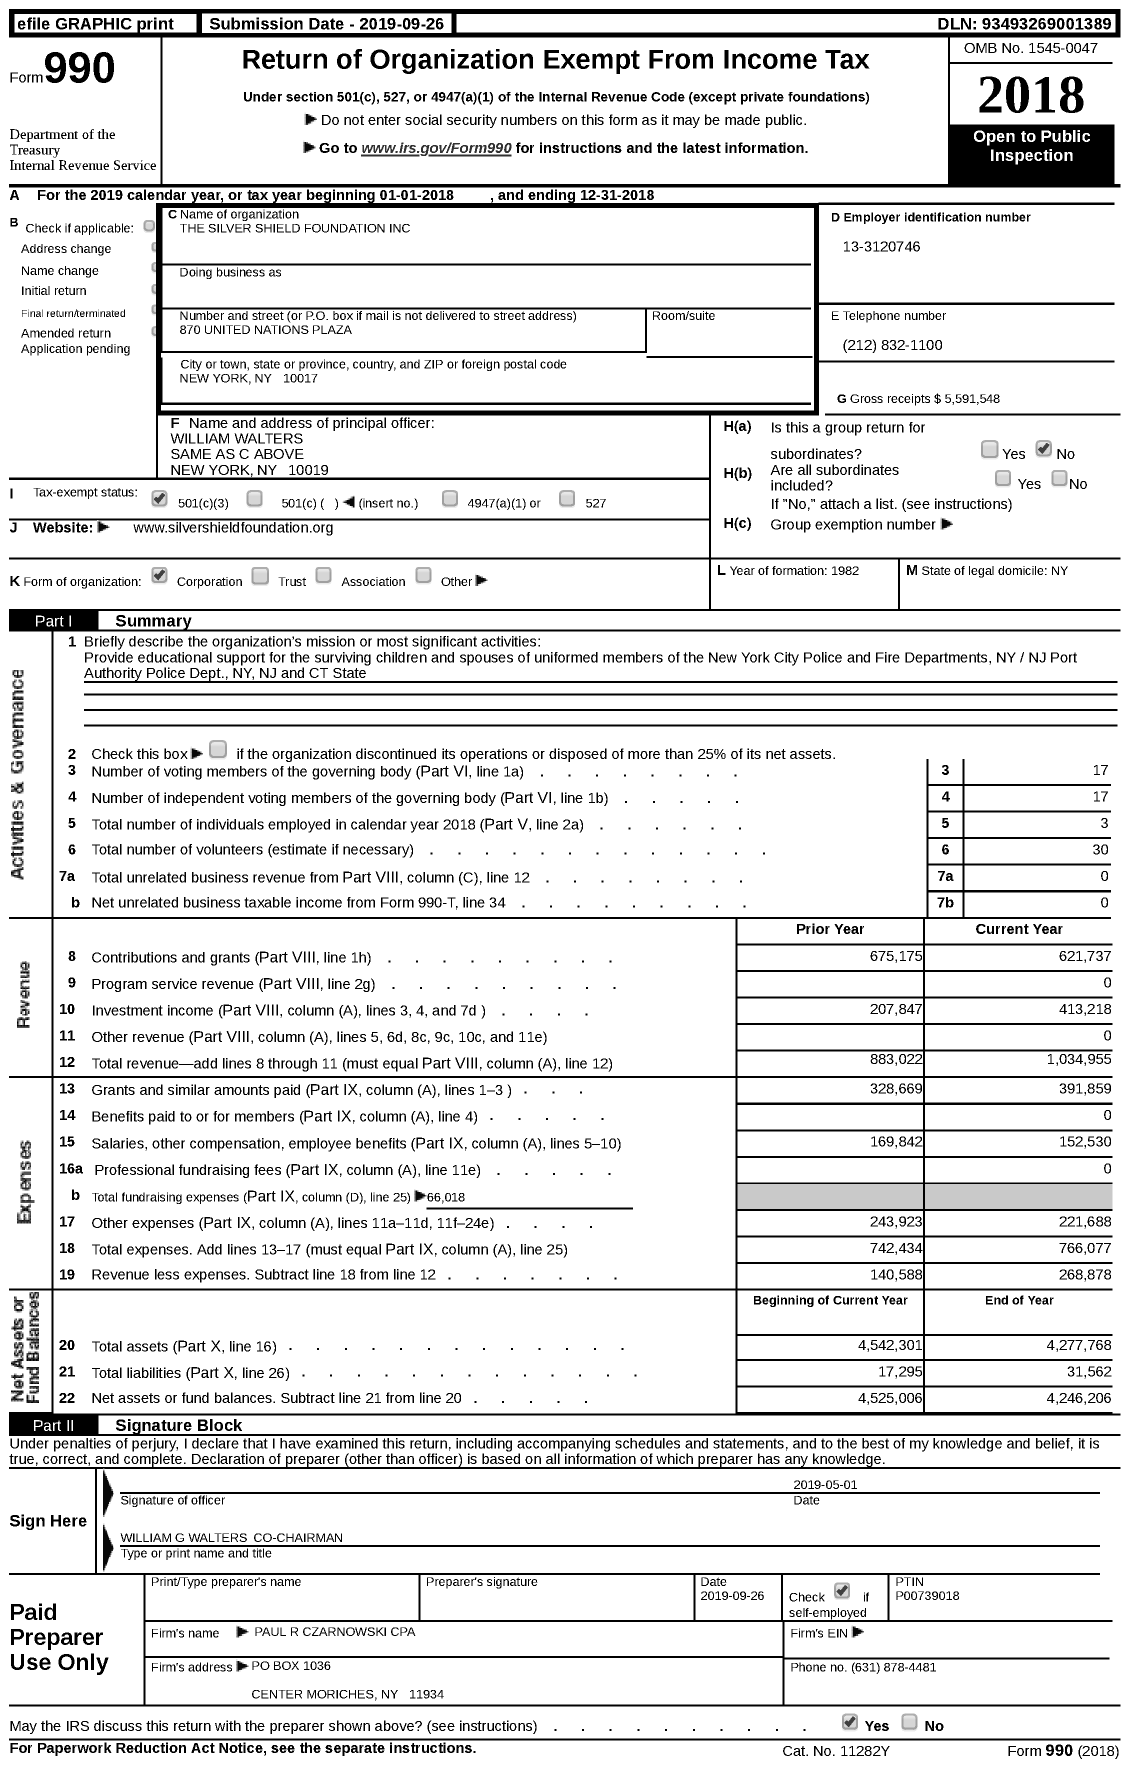 Image of first page of 2018 Form 990 for The Silver Shield Foundation